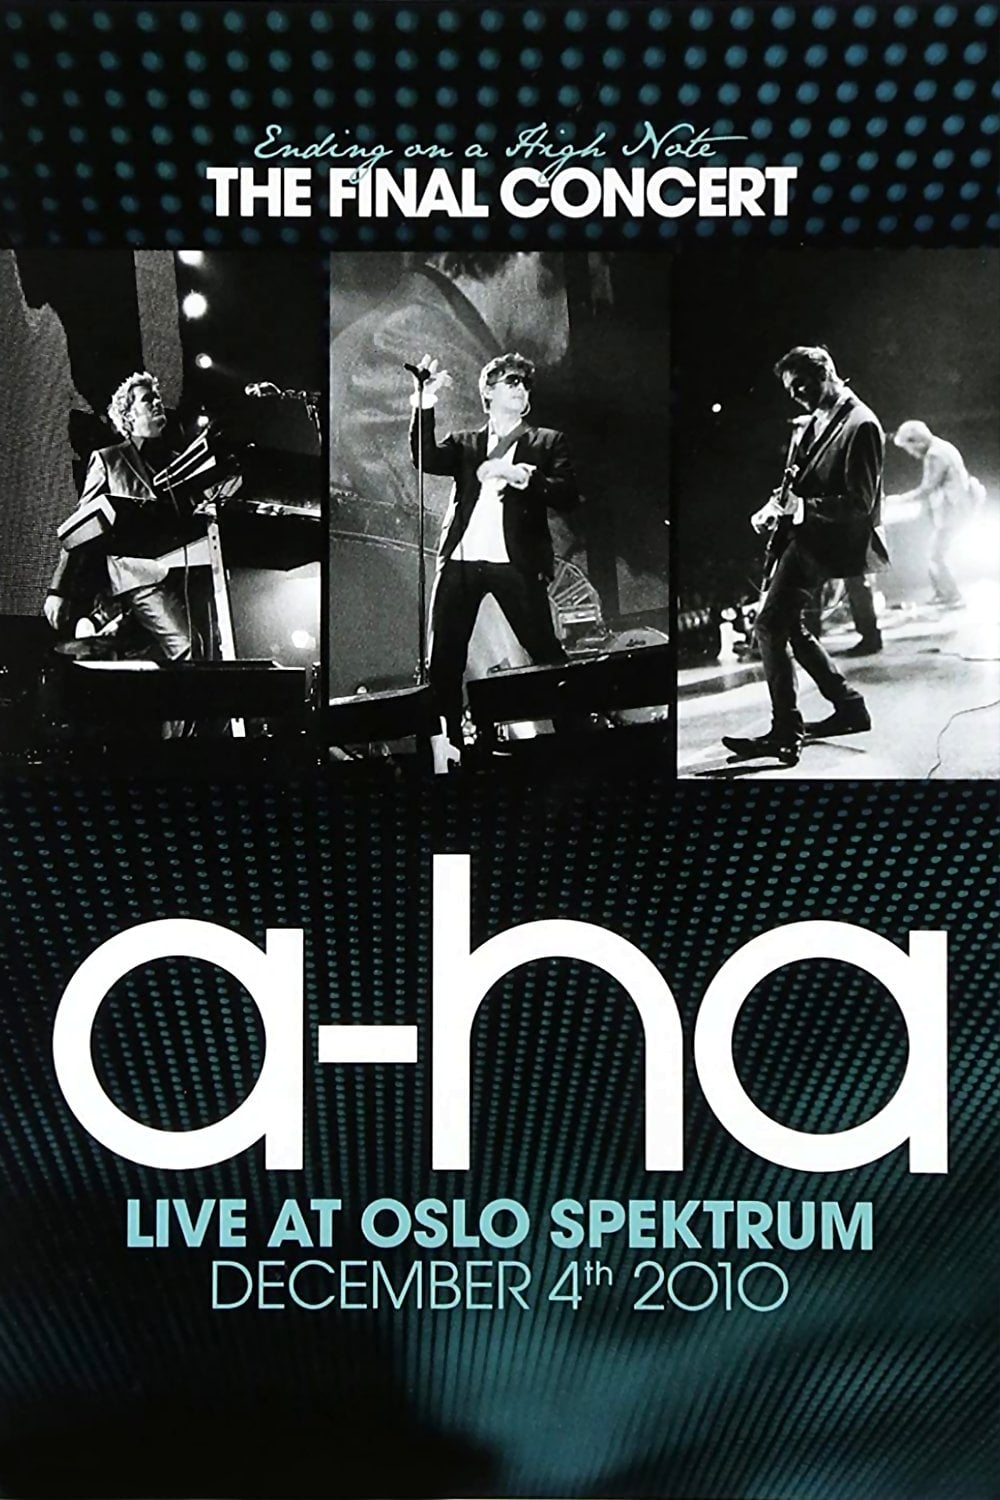 a-ha | Ending on a High Note: The Final Concert